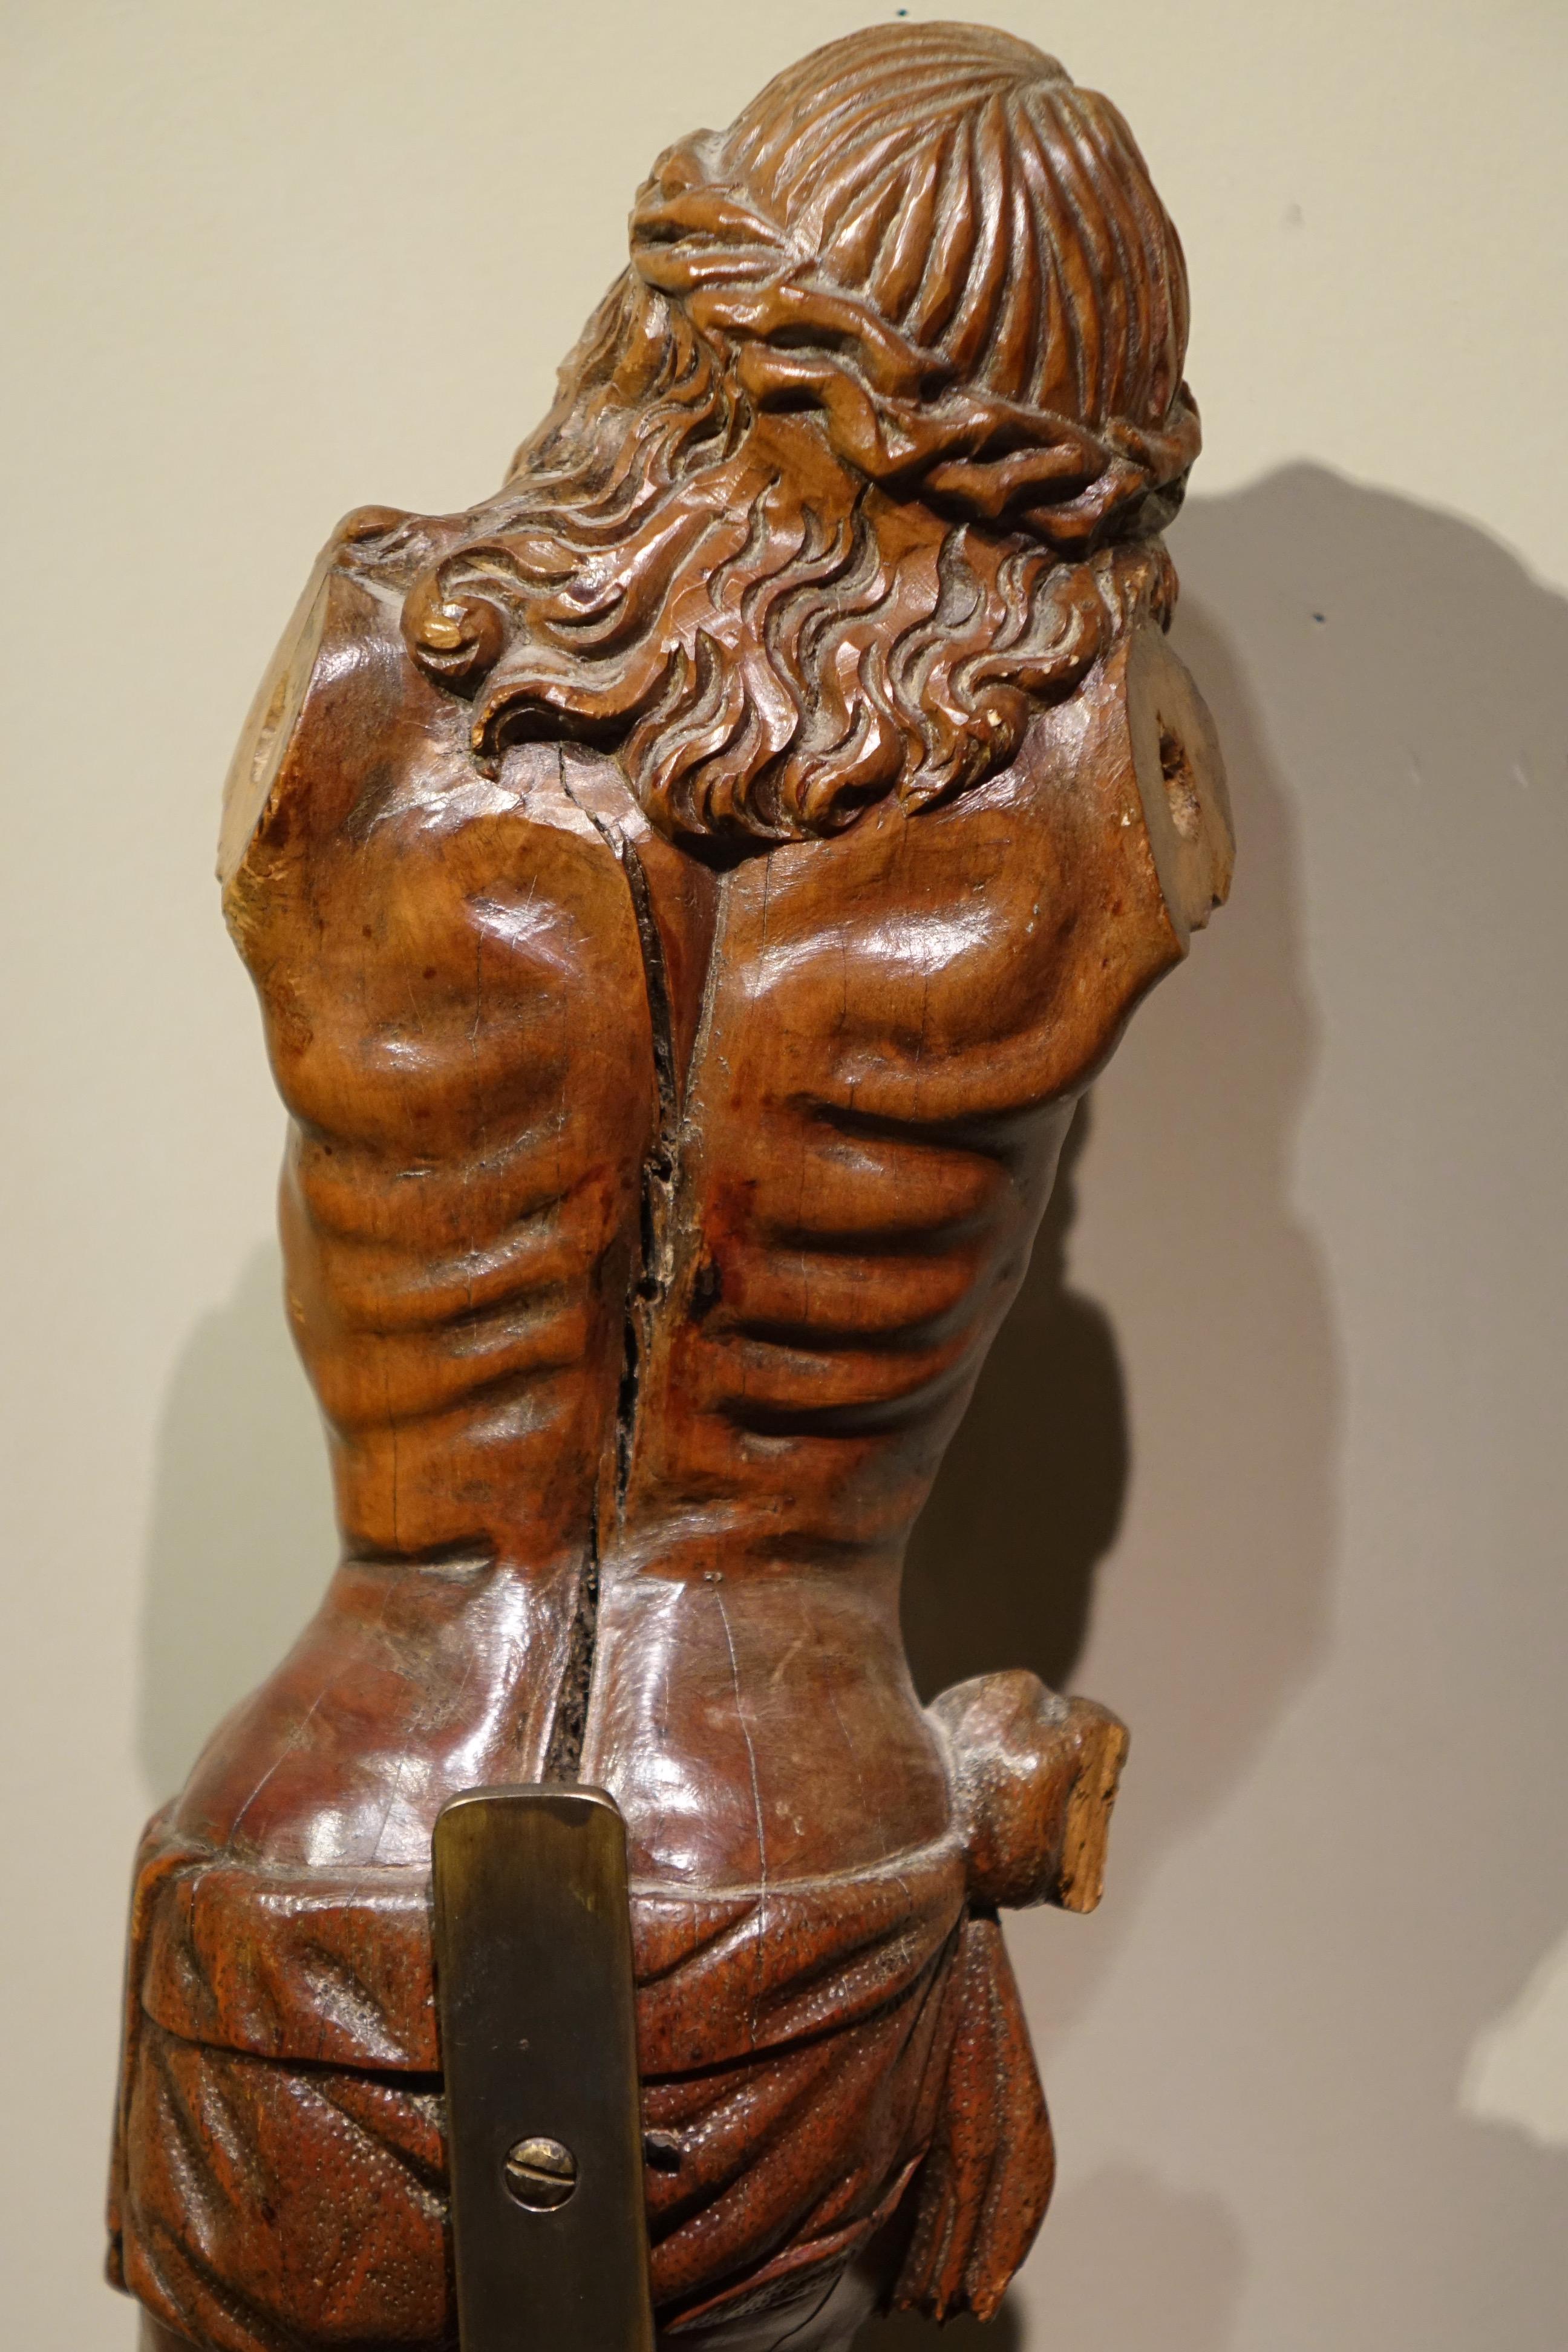 17th Century Christ in Boxwood, France, late 16th-early 17th century